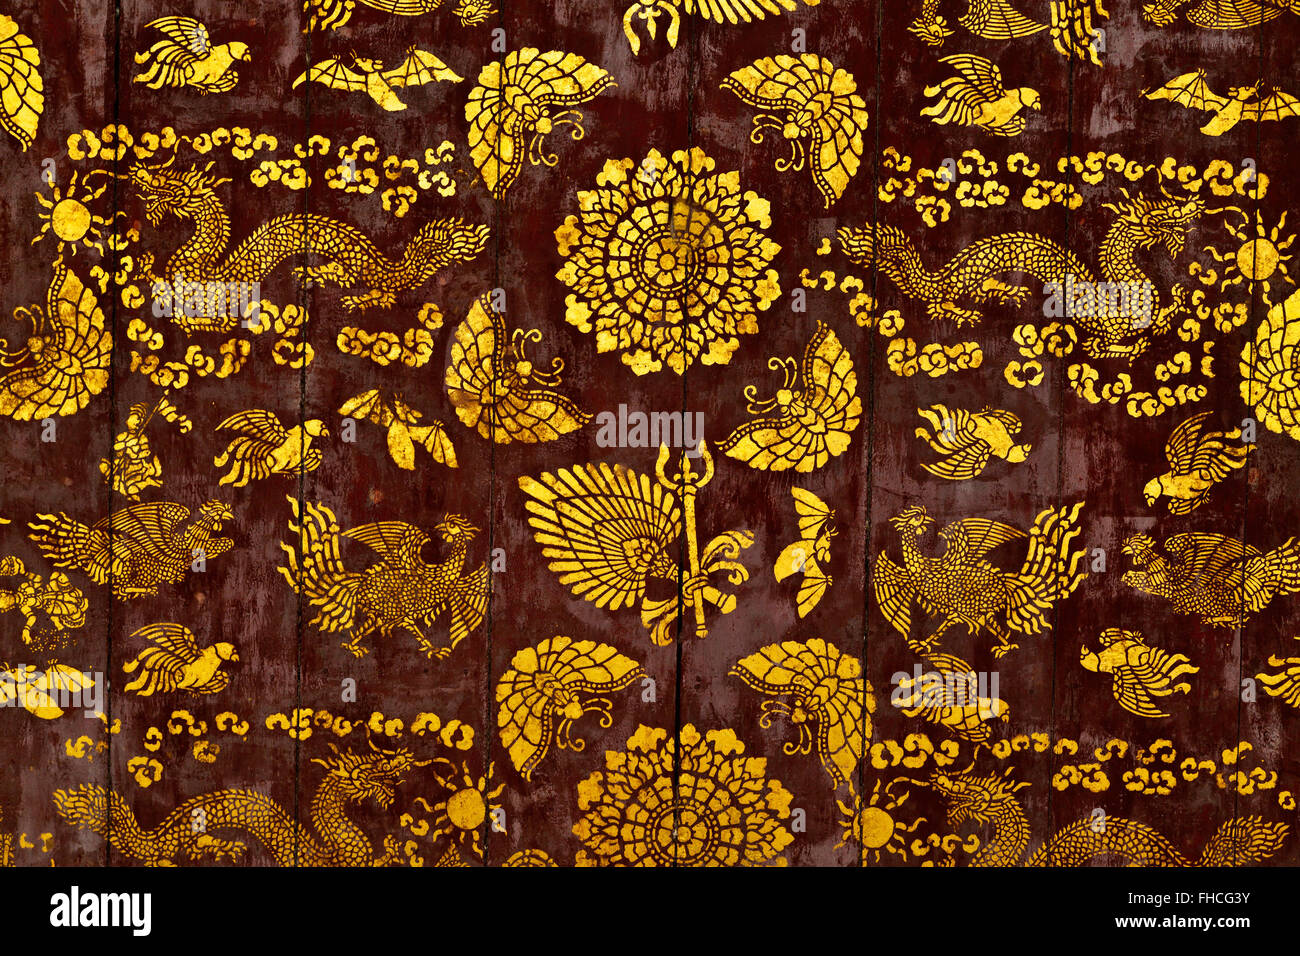 Stenciled DRAGON & PHONEIX ceiling designs on a BUDDHIST TEMPLE  - LUANG PRABANG, LAOS Stock Photo